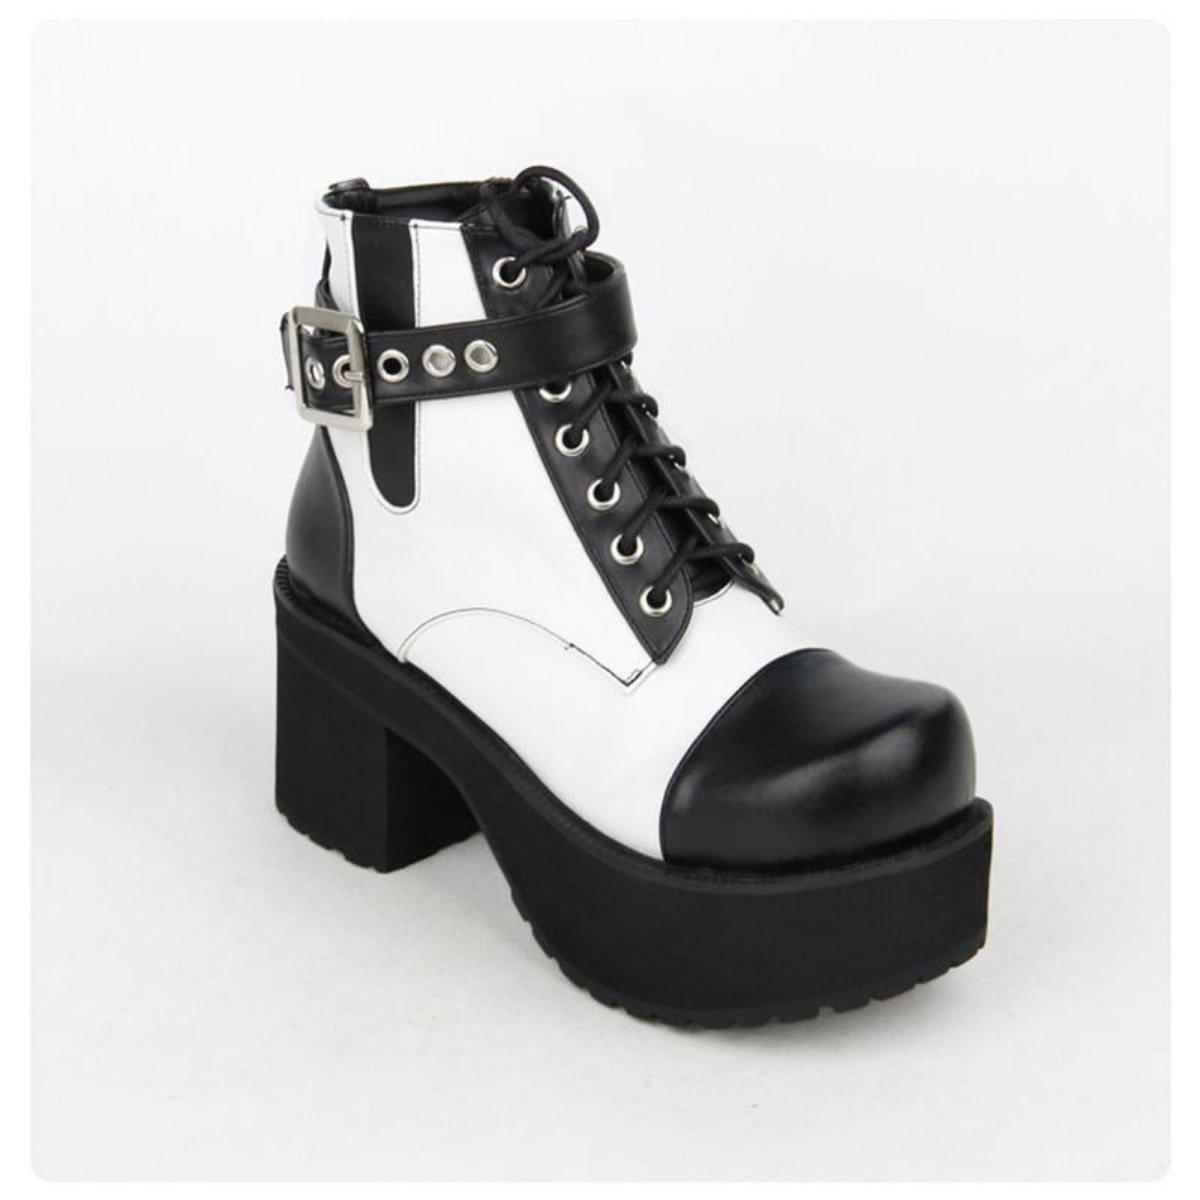 Women's Gothic Punk Ankle Boots with Block Heel - American Legend Rider